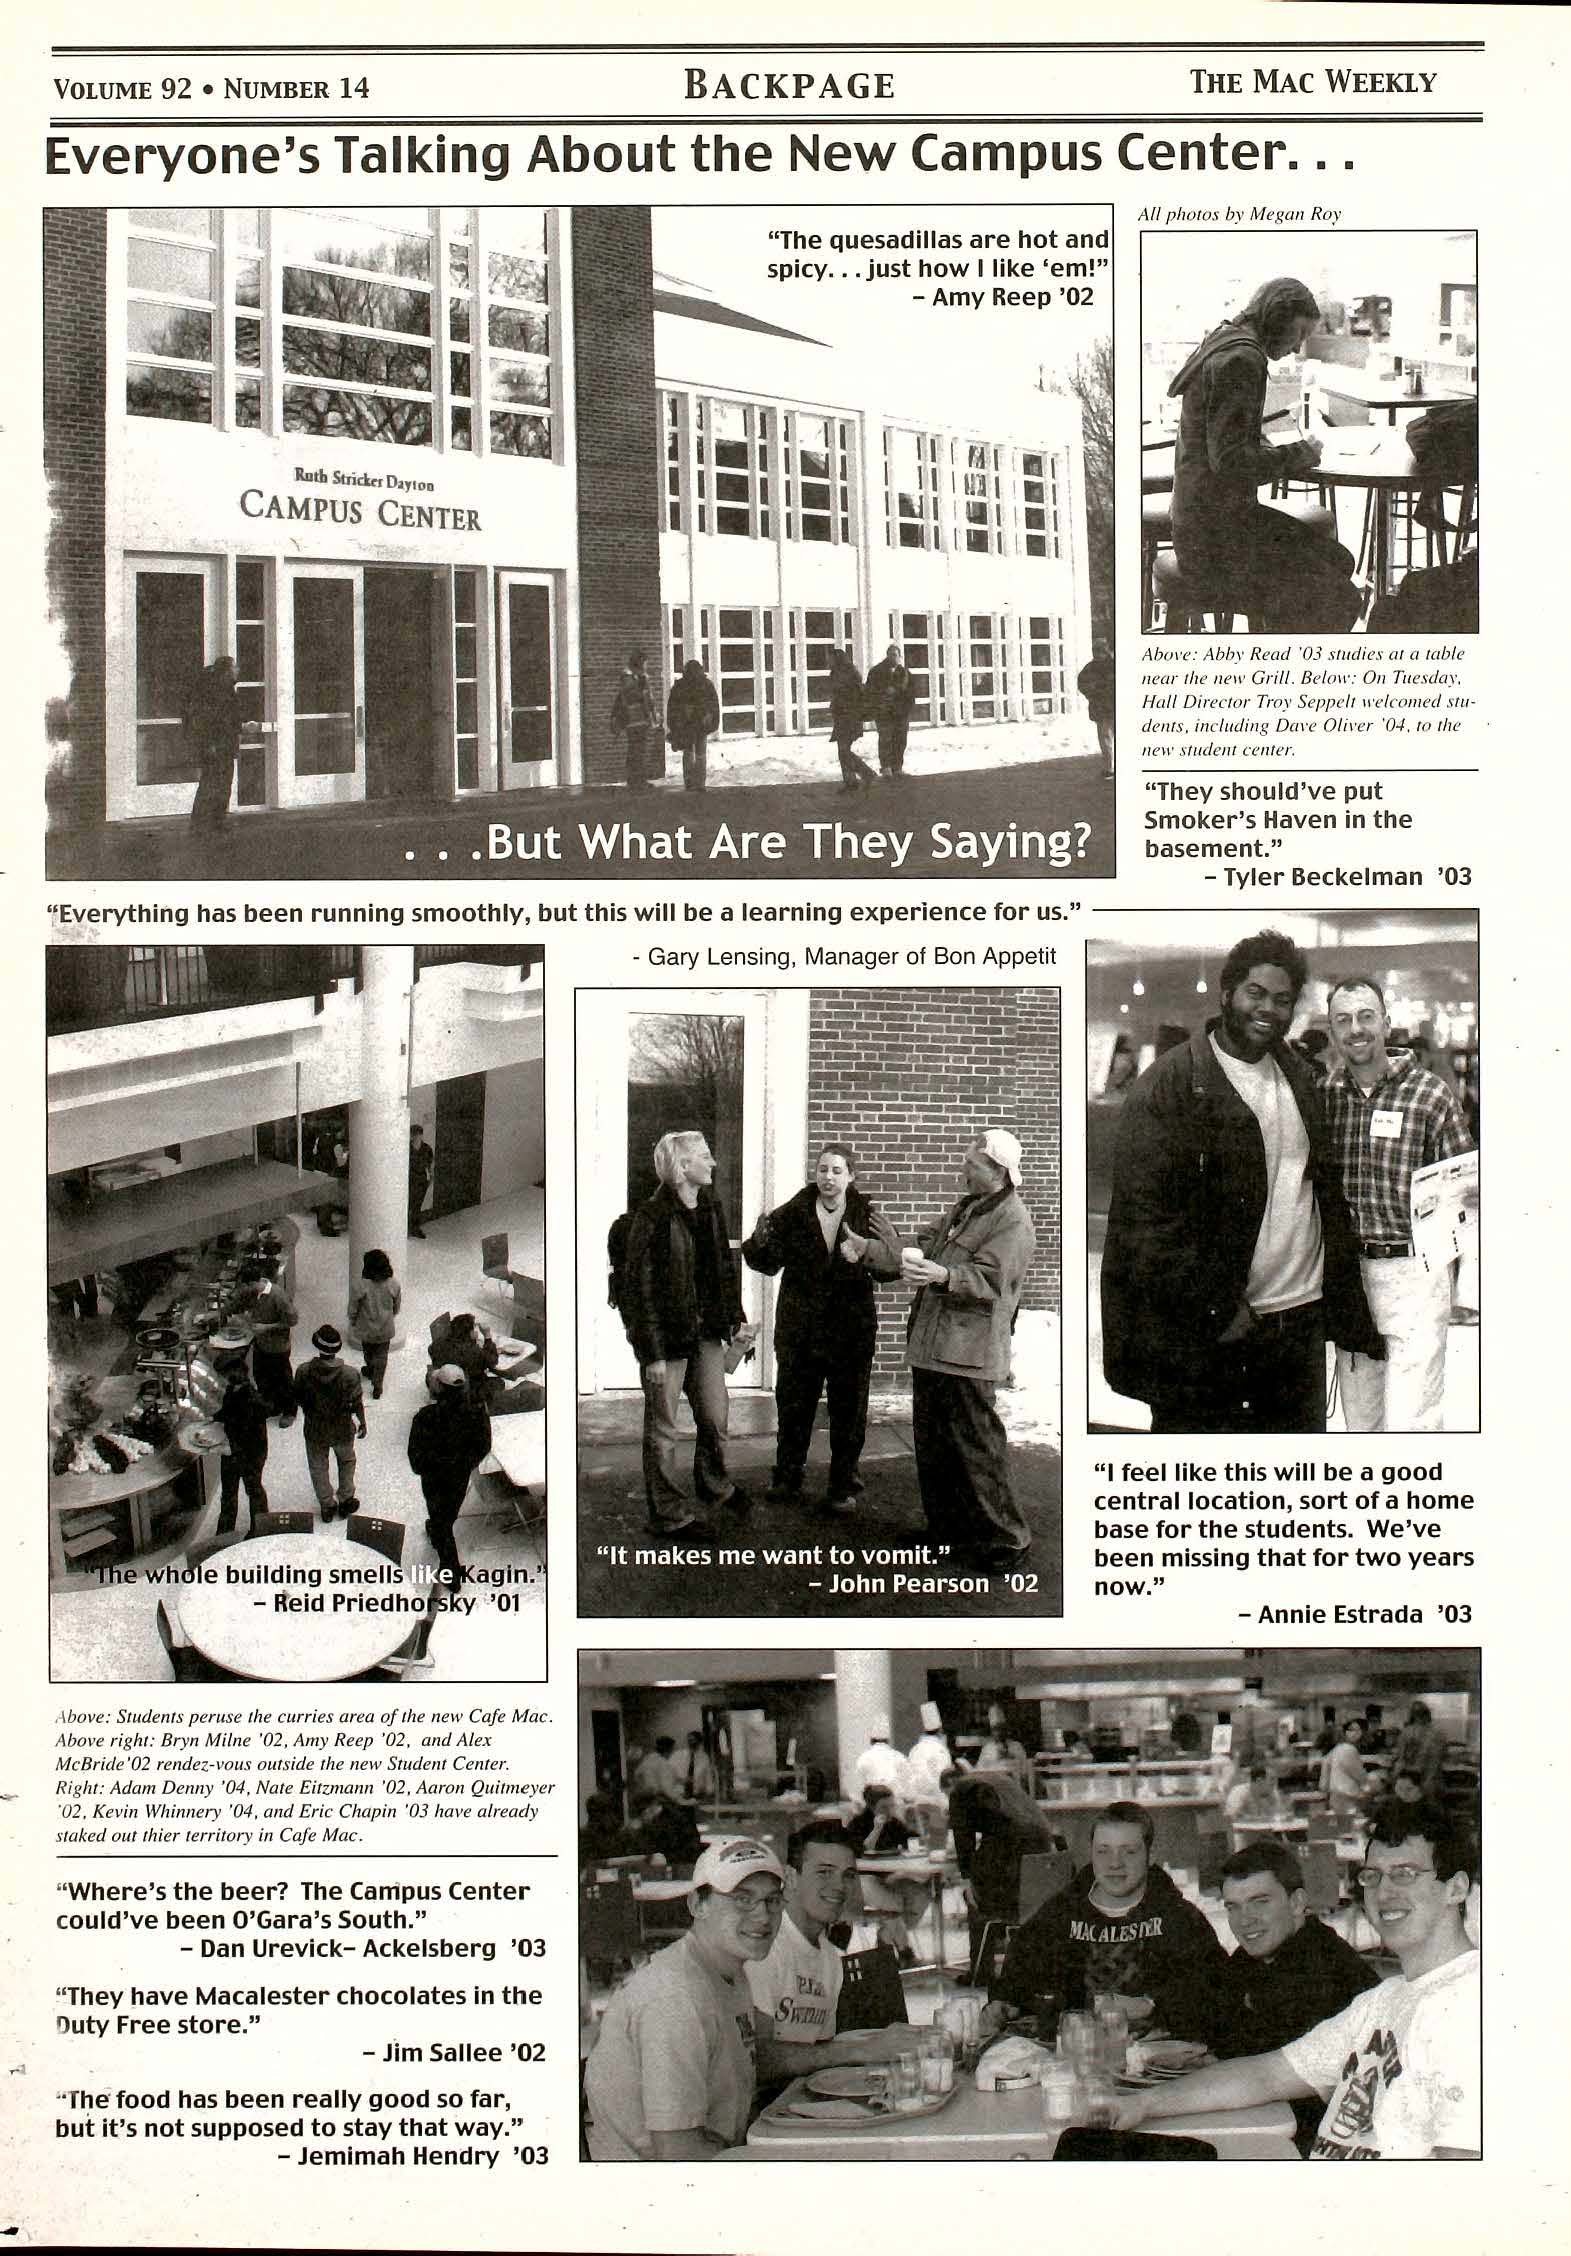 The Mac Weekly, February 9, 2001. Everyone's Talking About the New Campus Center.